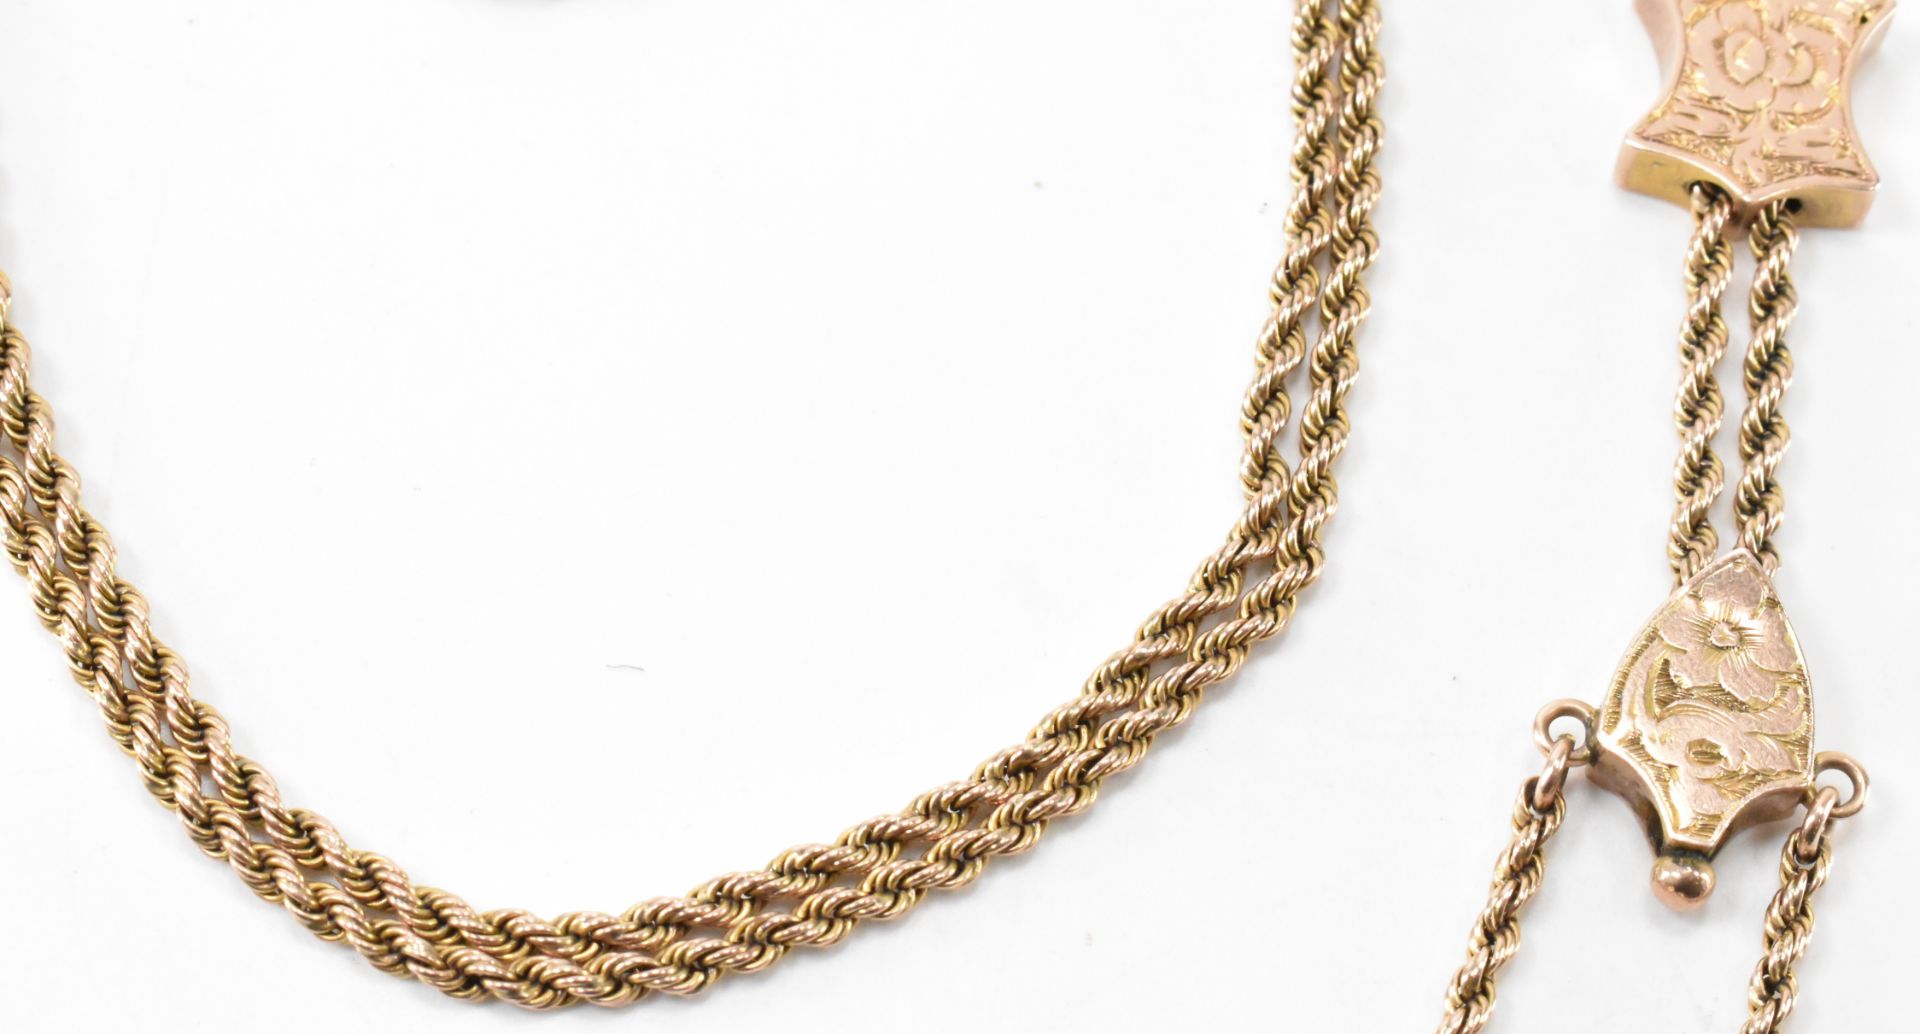 VICTORIAN 9CT GOLD POCKET WATCH CHAIN NECKLACE - Image 3 of 6